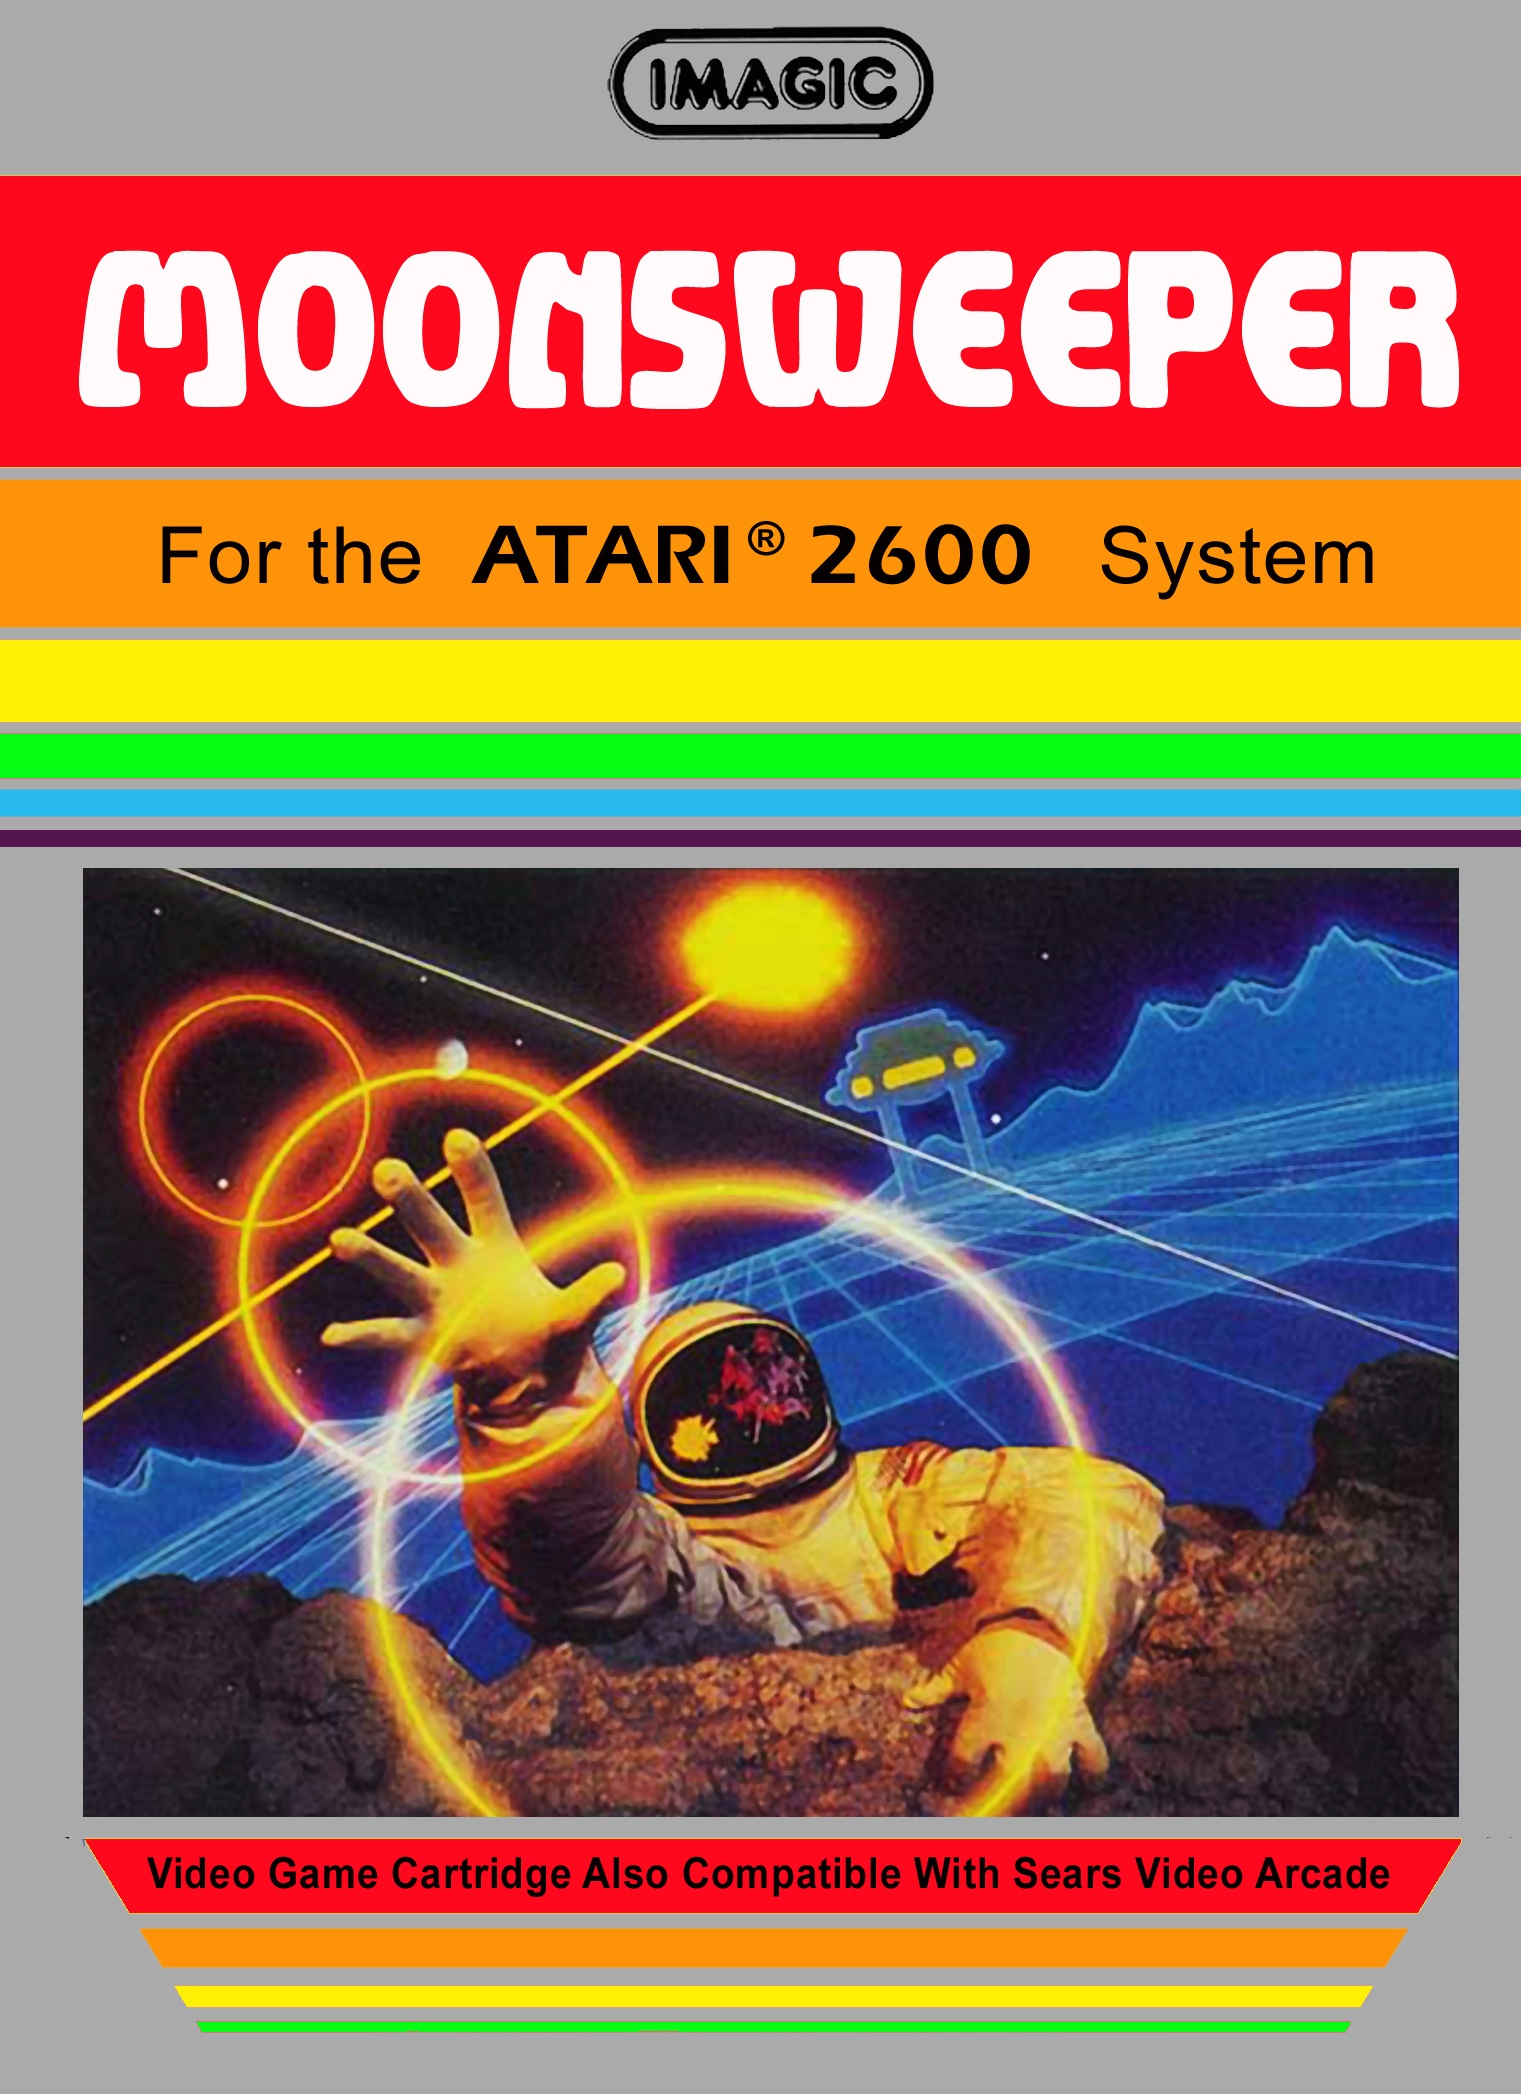 Moonsweeper Picture